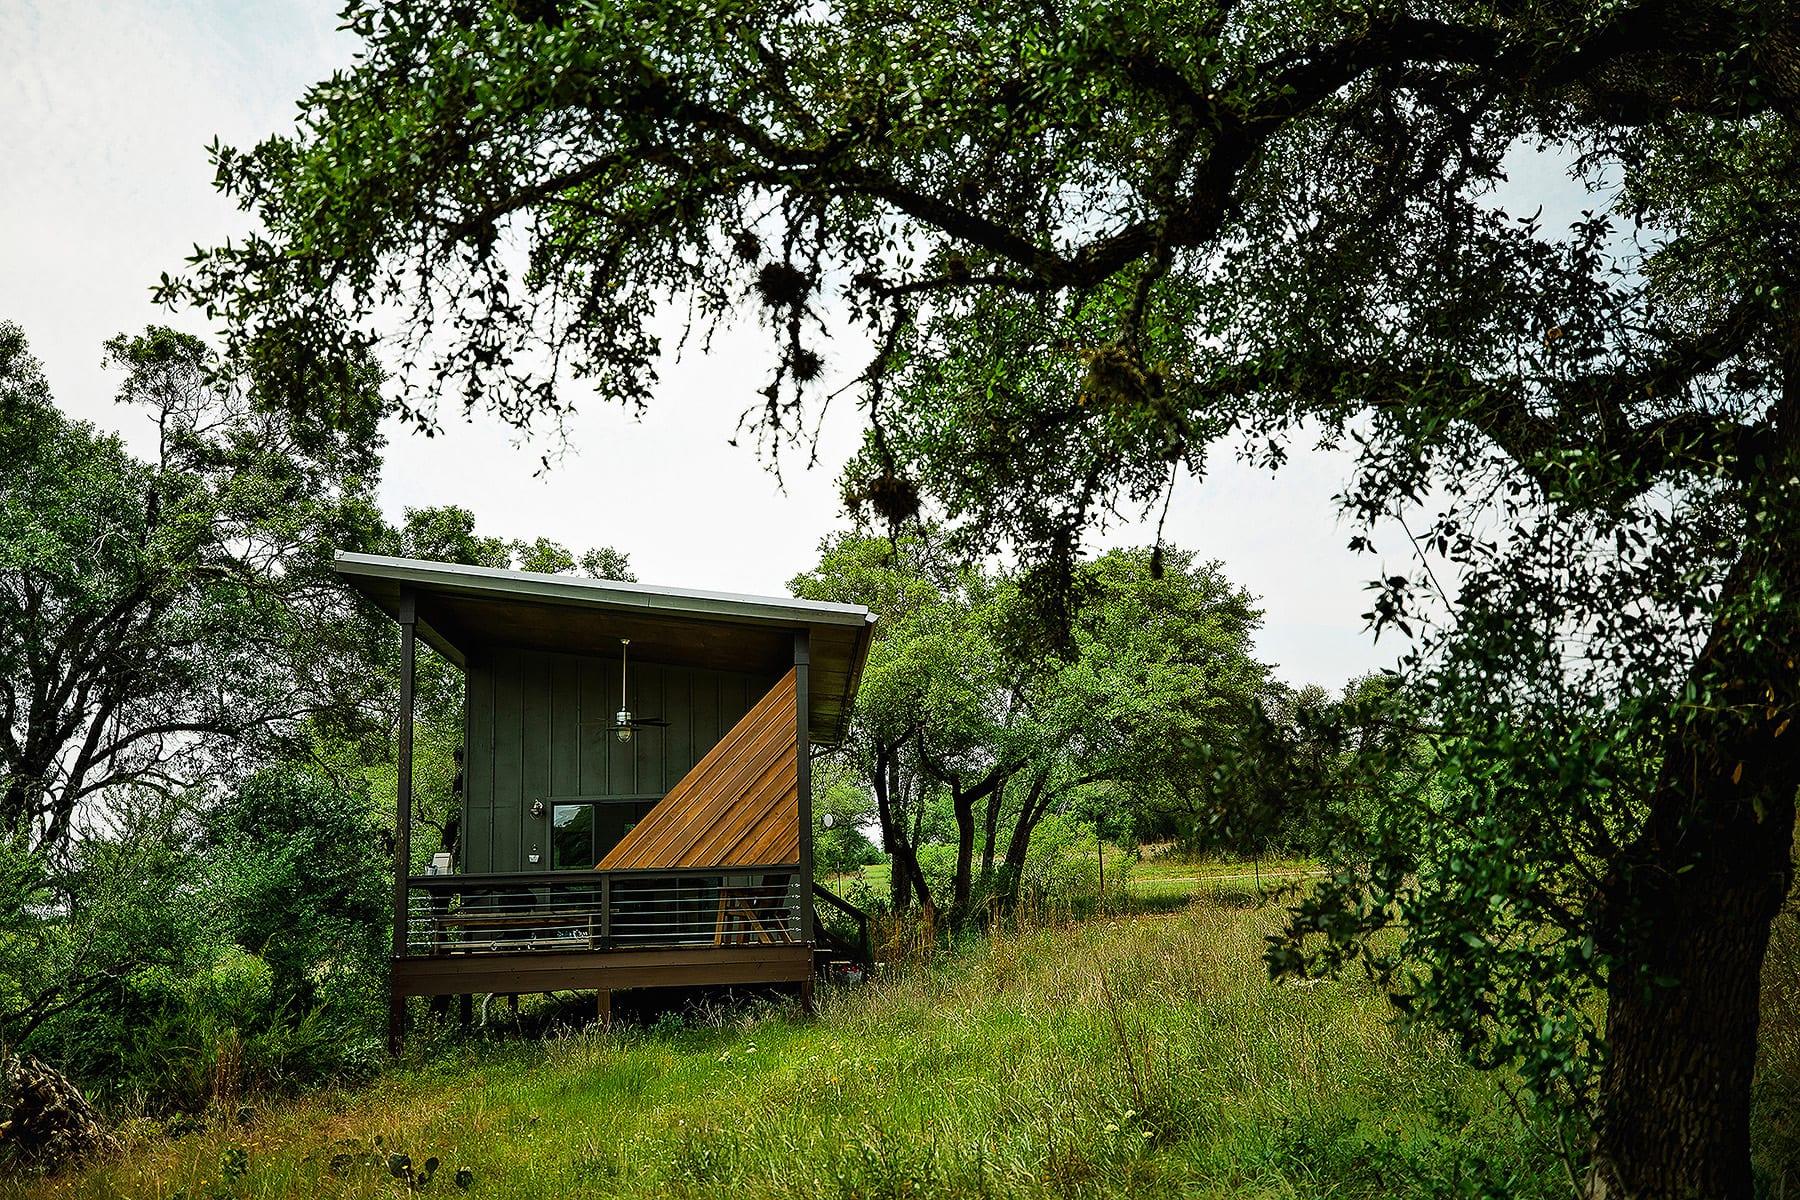 Wanderin Star Farms in Dripping Springs, Texas AirBNB vacation rental tiny cabin